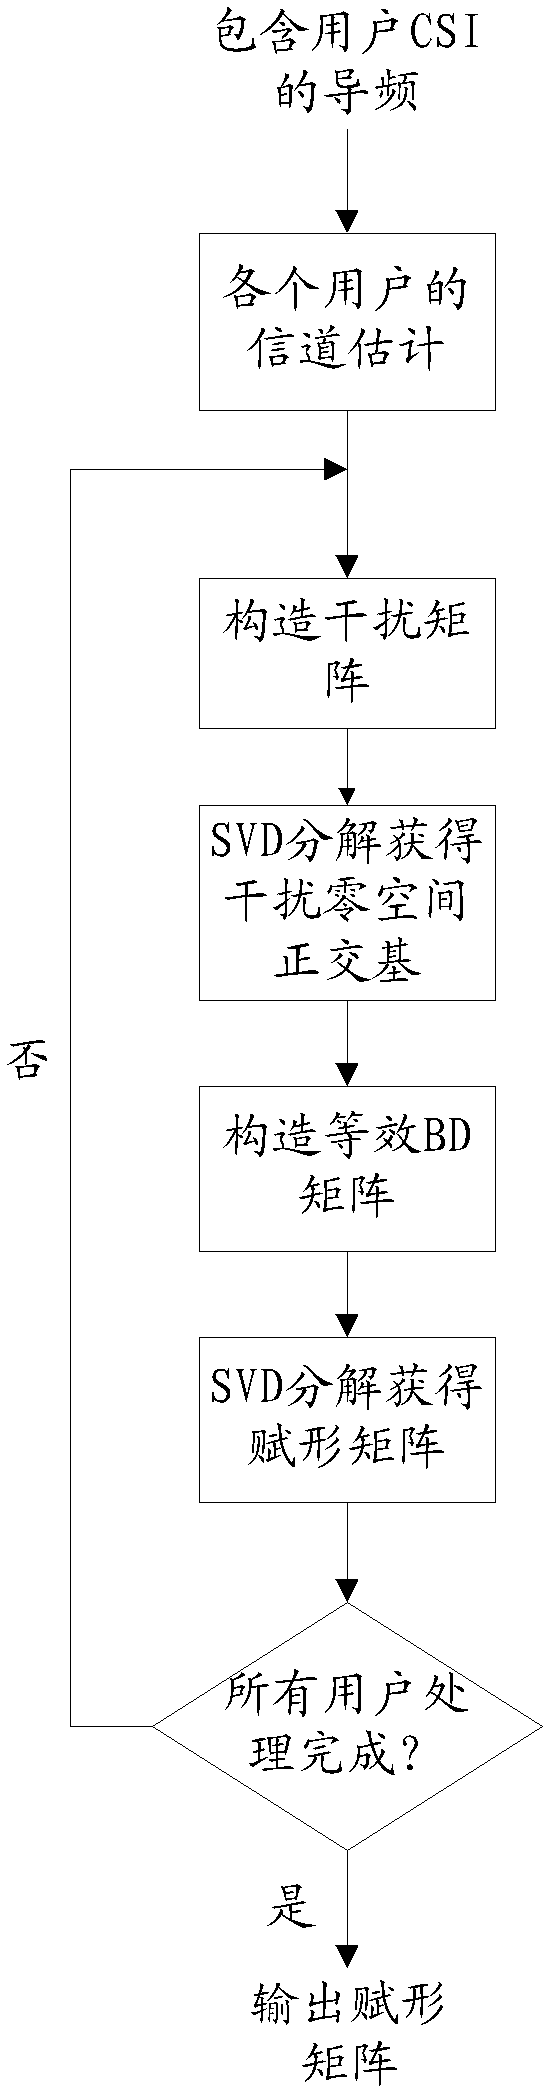 Method and device for precoding in multi-user MIMO (multiple input multiple output) system